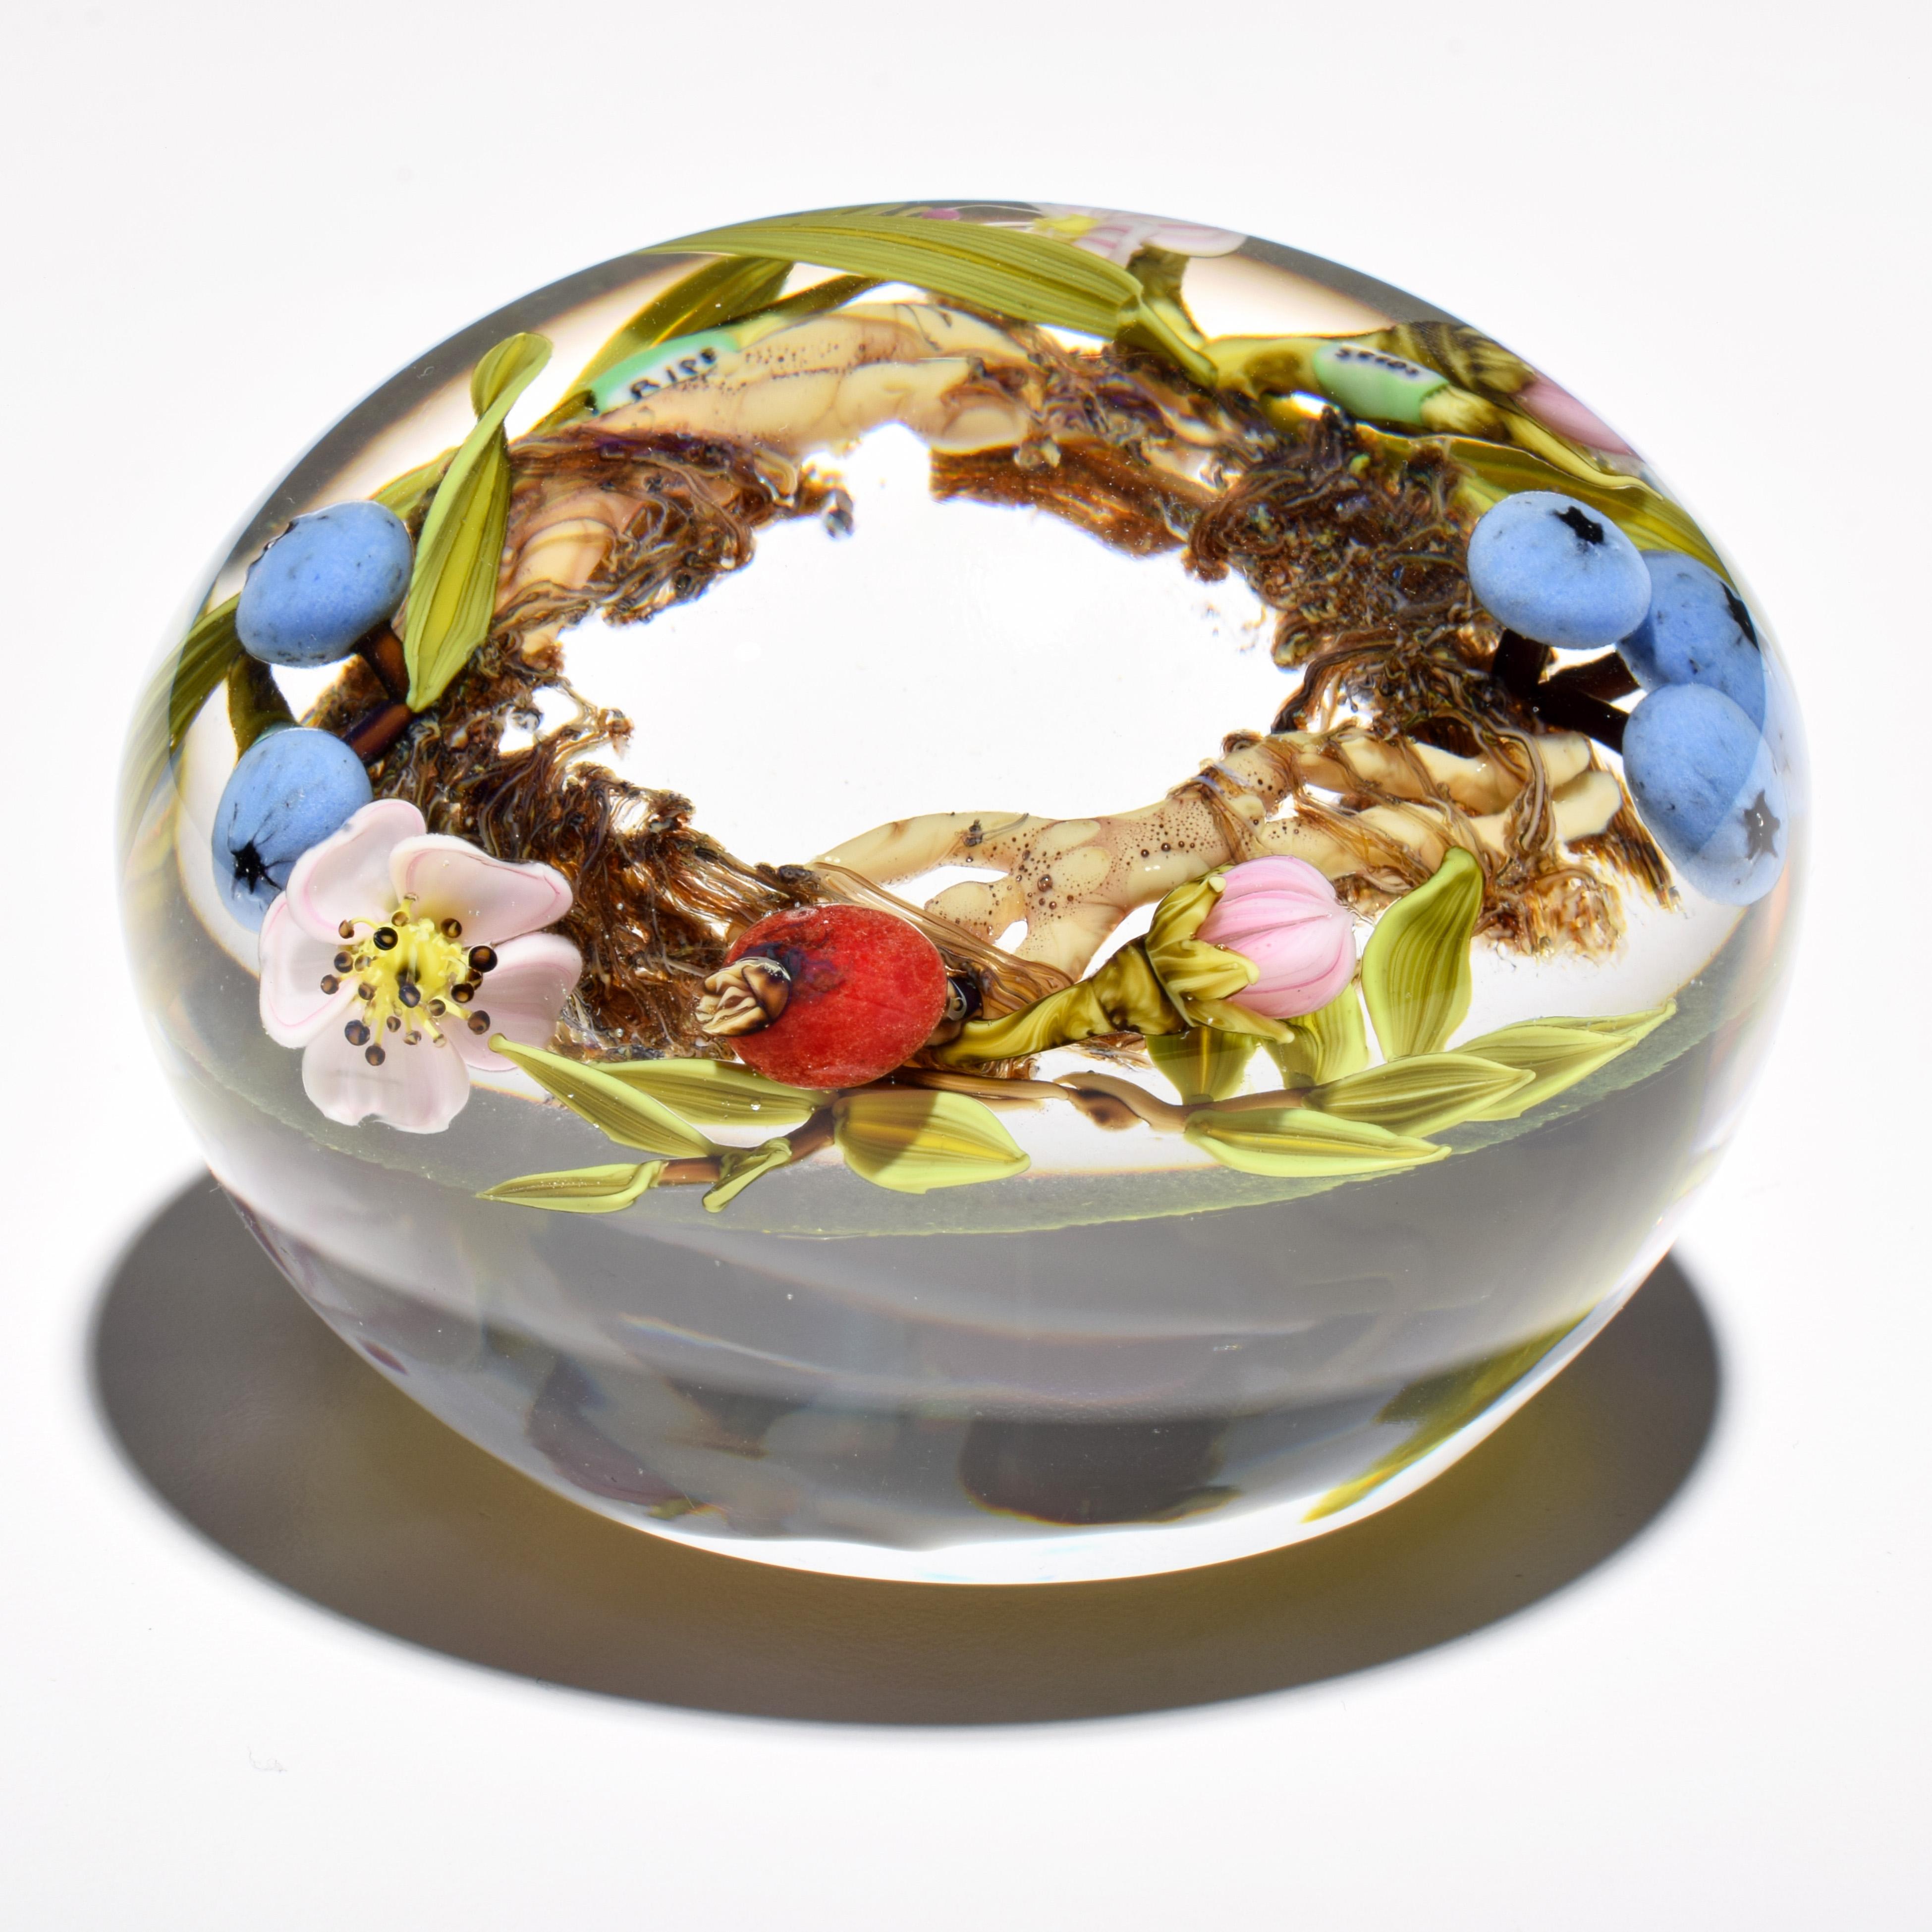 Additional Information: Provenance: Private Collection, Palm Beach, Florida.

Marking(s); notes: signed

Country of origin; materials: USA; lampwork glass, polished clear glass